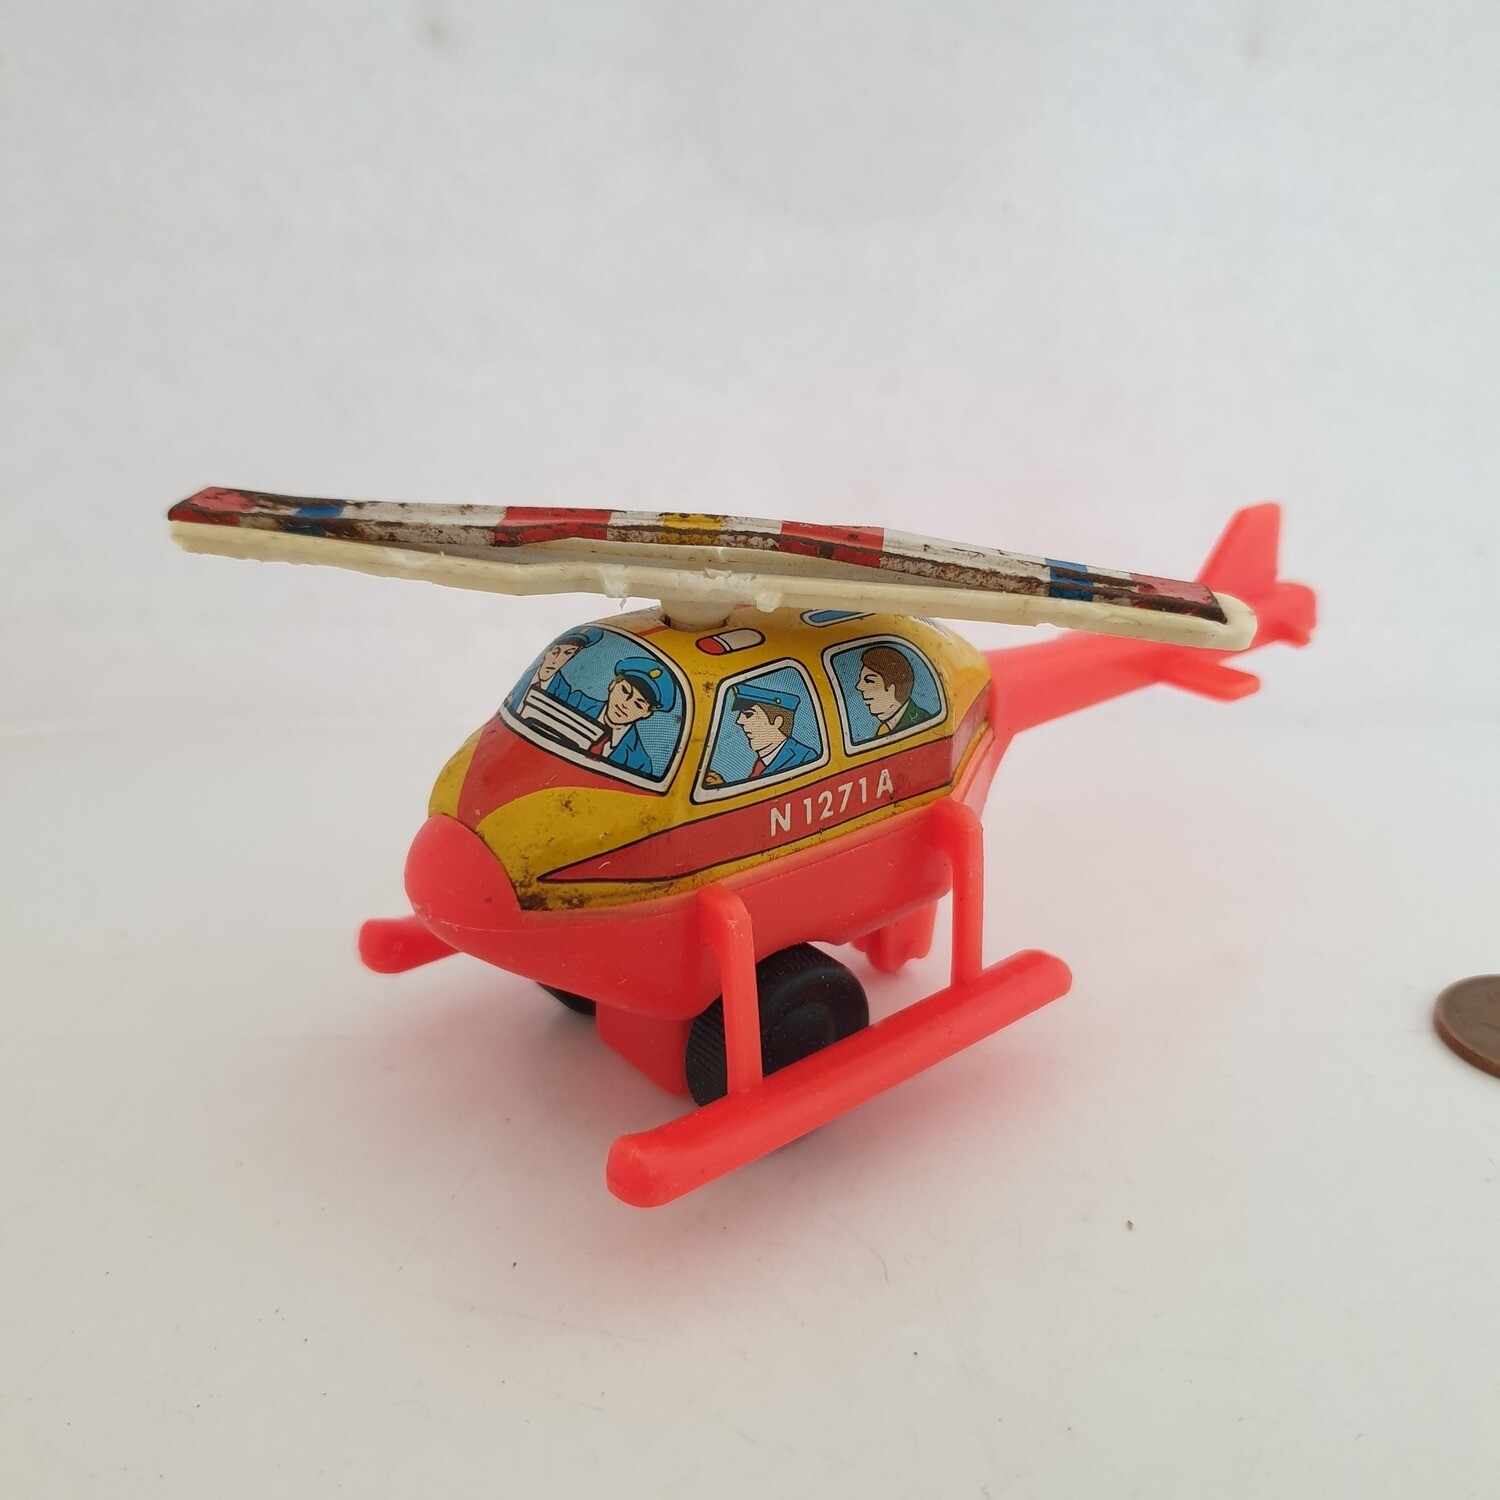 Vintage Toy Helicopter - Made in Japan (DG23)